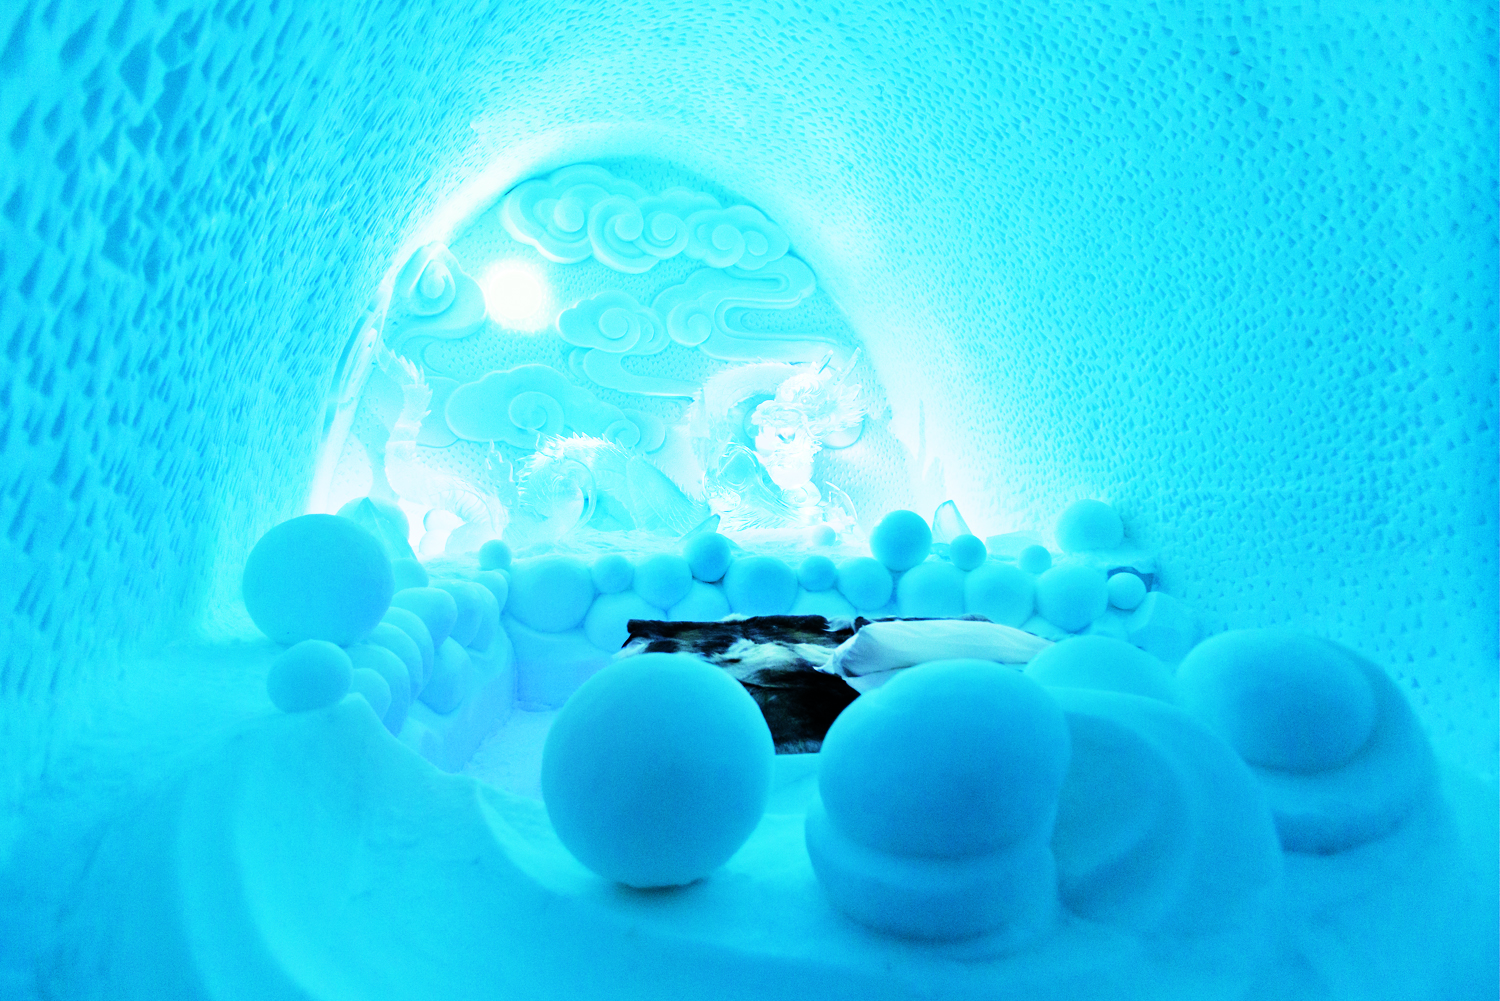 The Dragon Residence at Sweden's Icehotel.